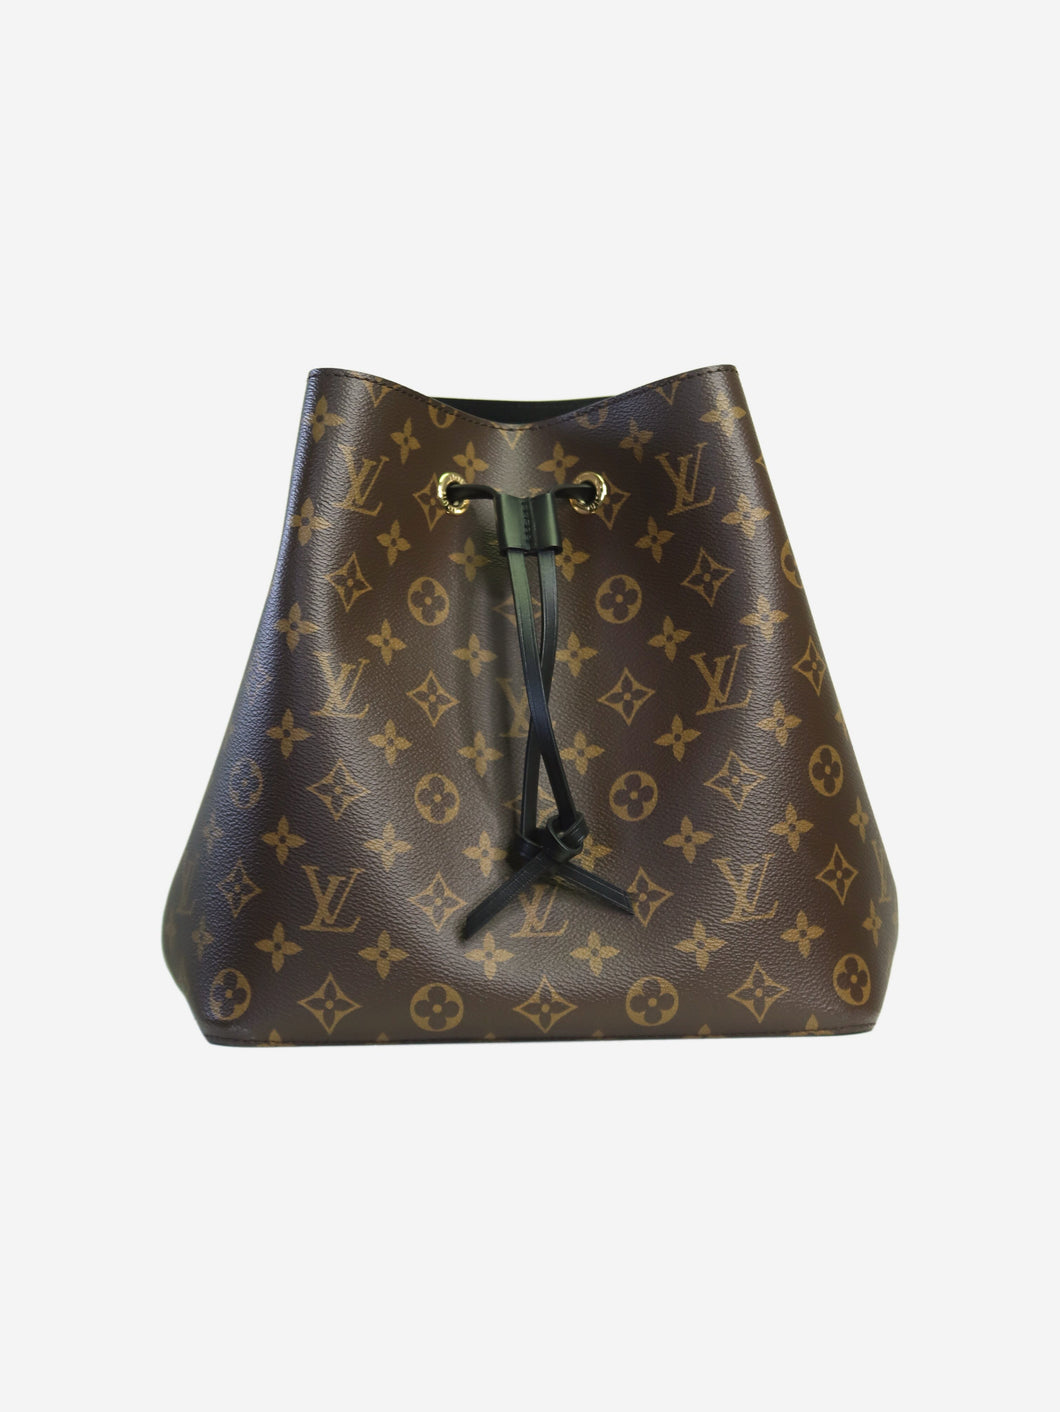 5 Days and 5 ways to Carry a Louis Vuitton Bags for Women